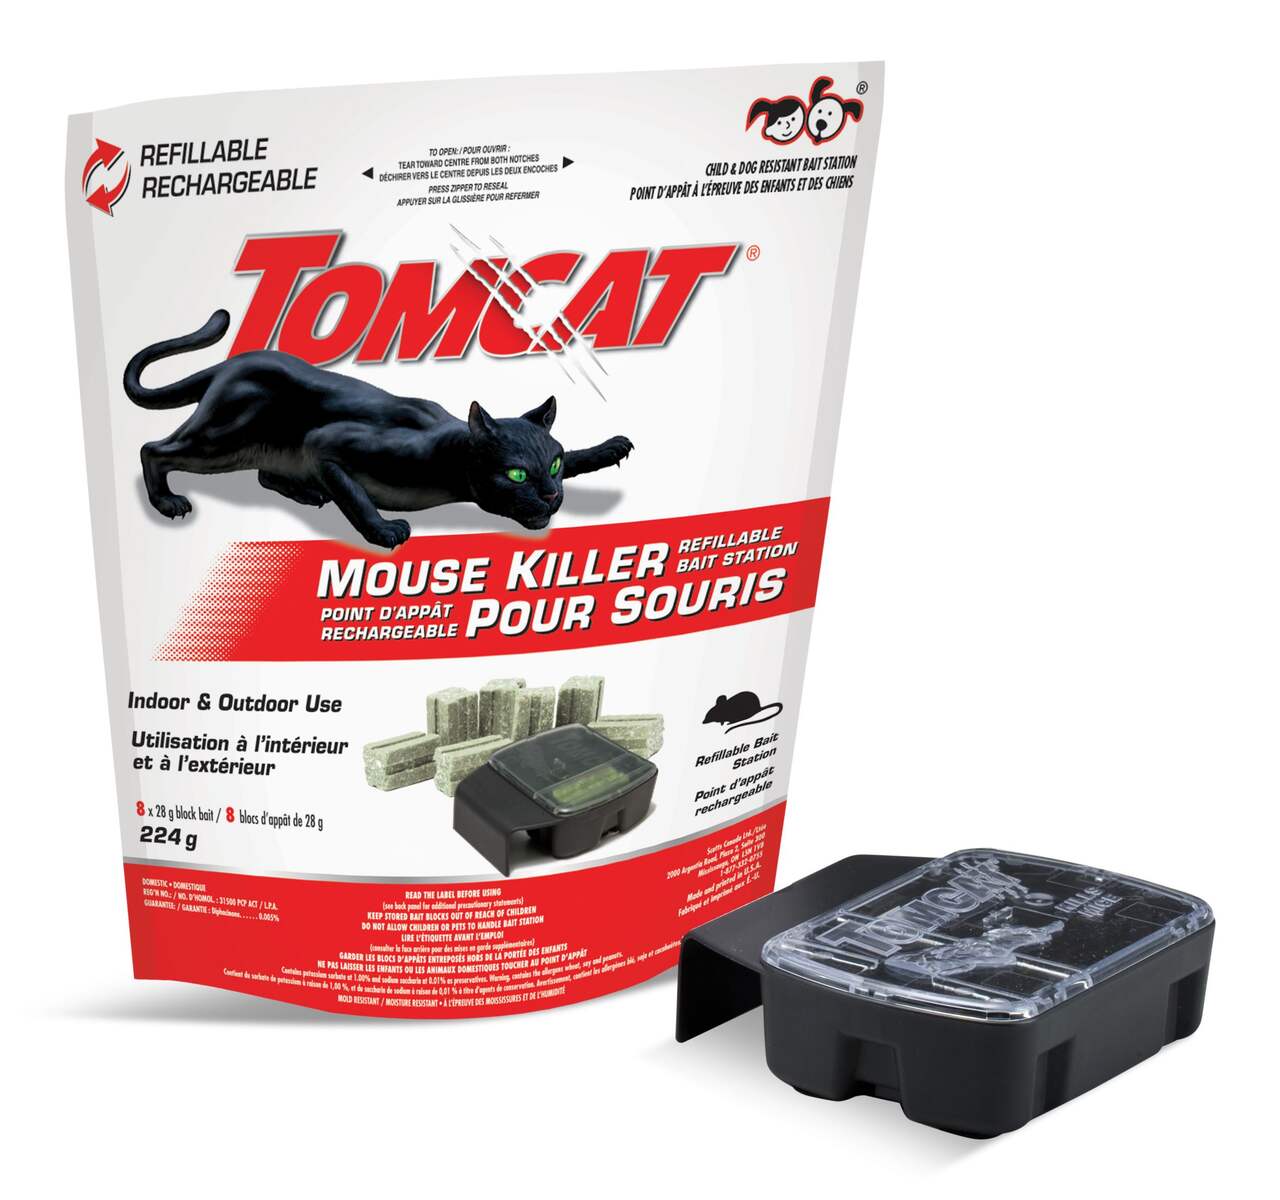 https://media-www.canadiantire.ca/product/seasonal-gardening/gardening/weed-insect-and-pest-control/0591679/tomcat-mouse-killer-refillable-bait-station-8-pack-0f1ff179-7d2b-4605-82ab-b154c8ce078b-jpgrendition.jpg?imdensity=1&imwidth=640&impolicy=mZoom